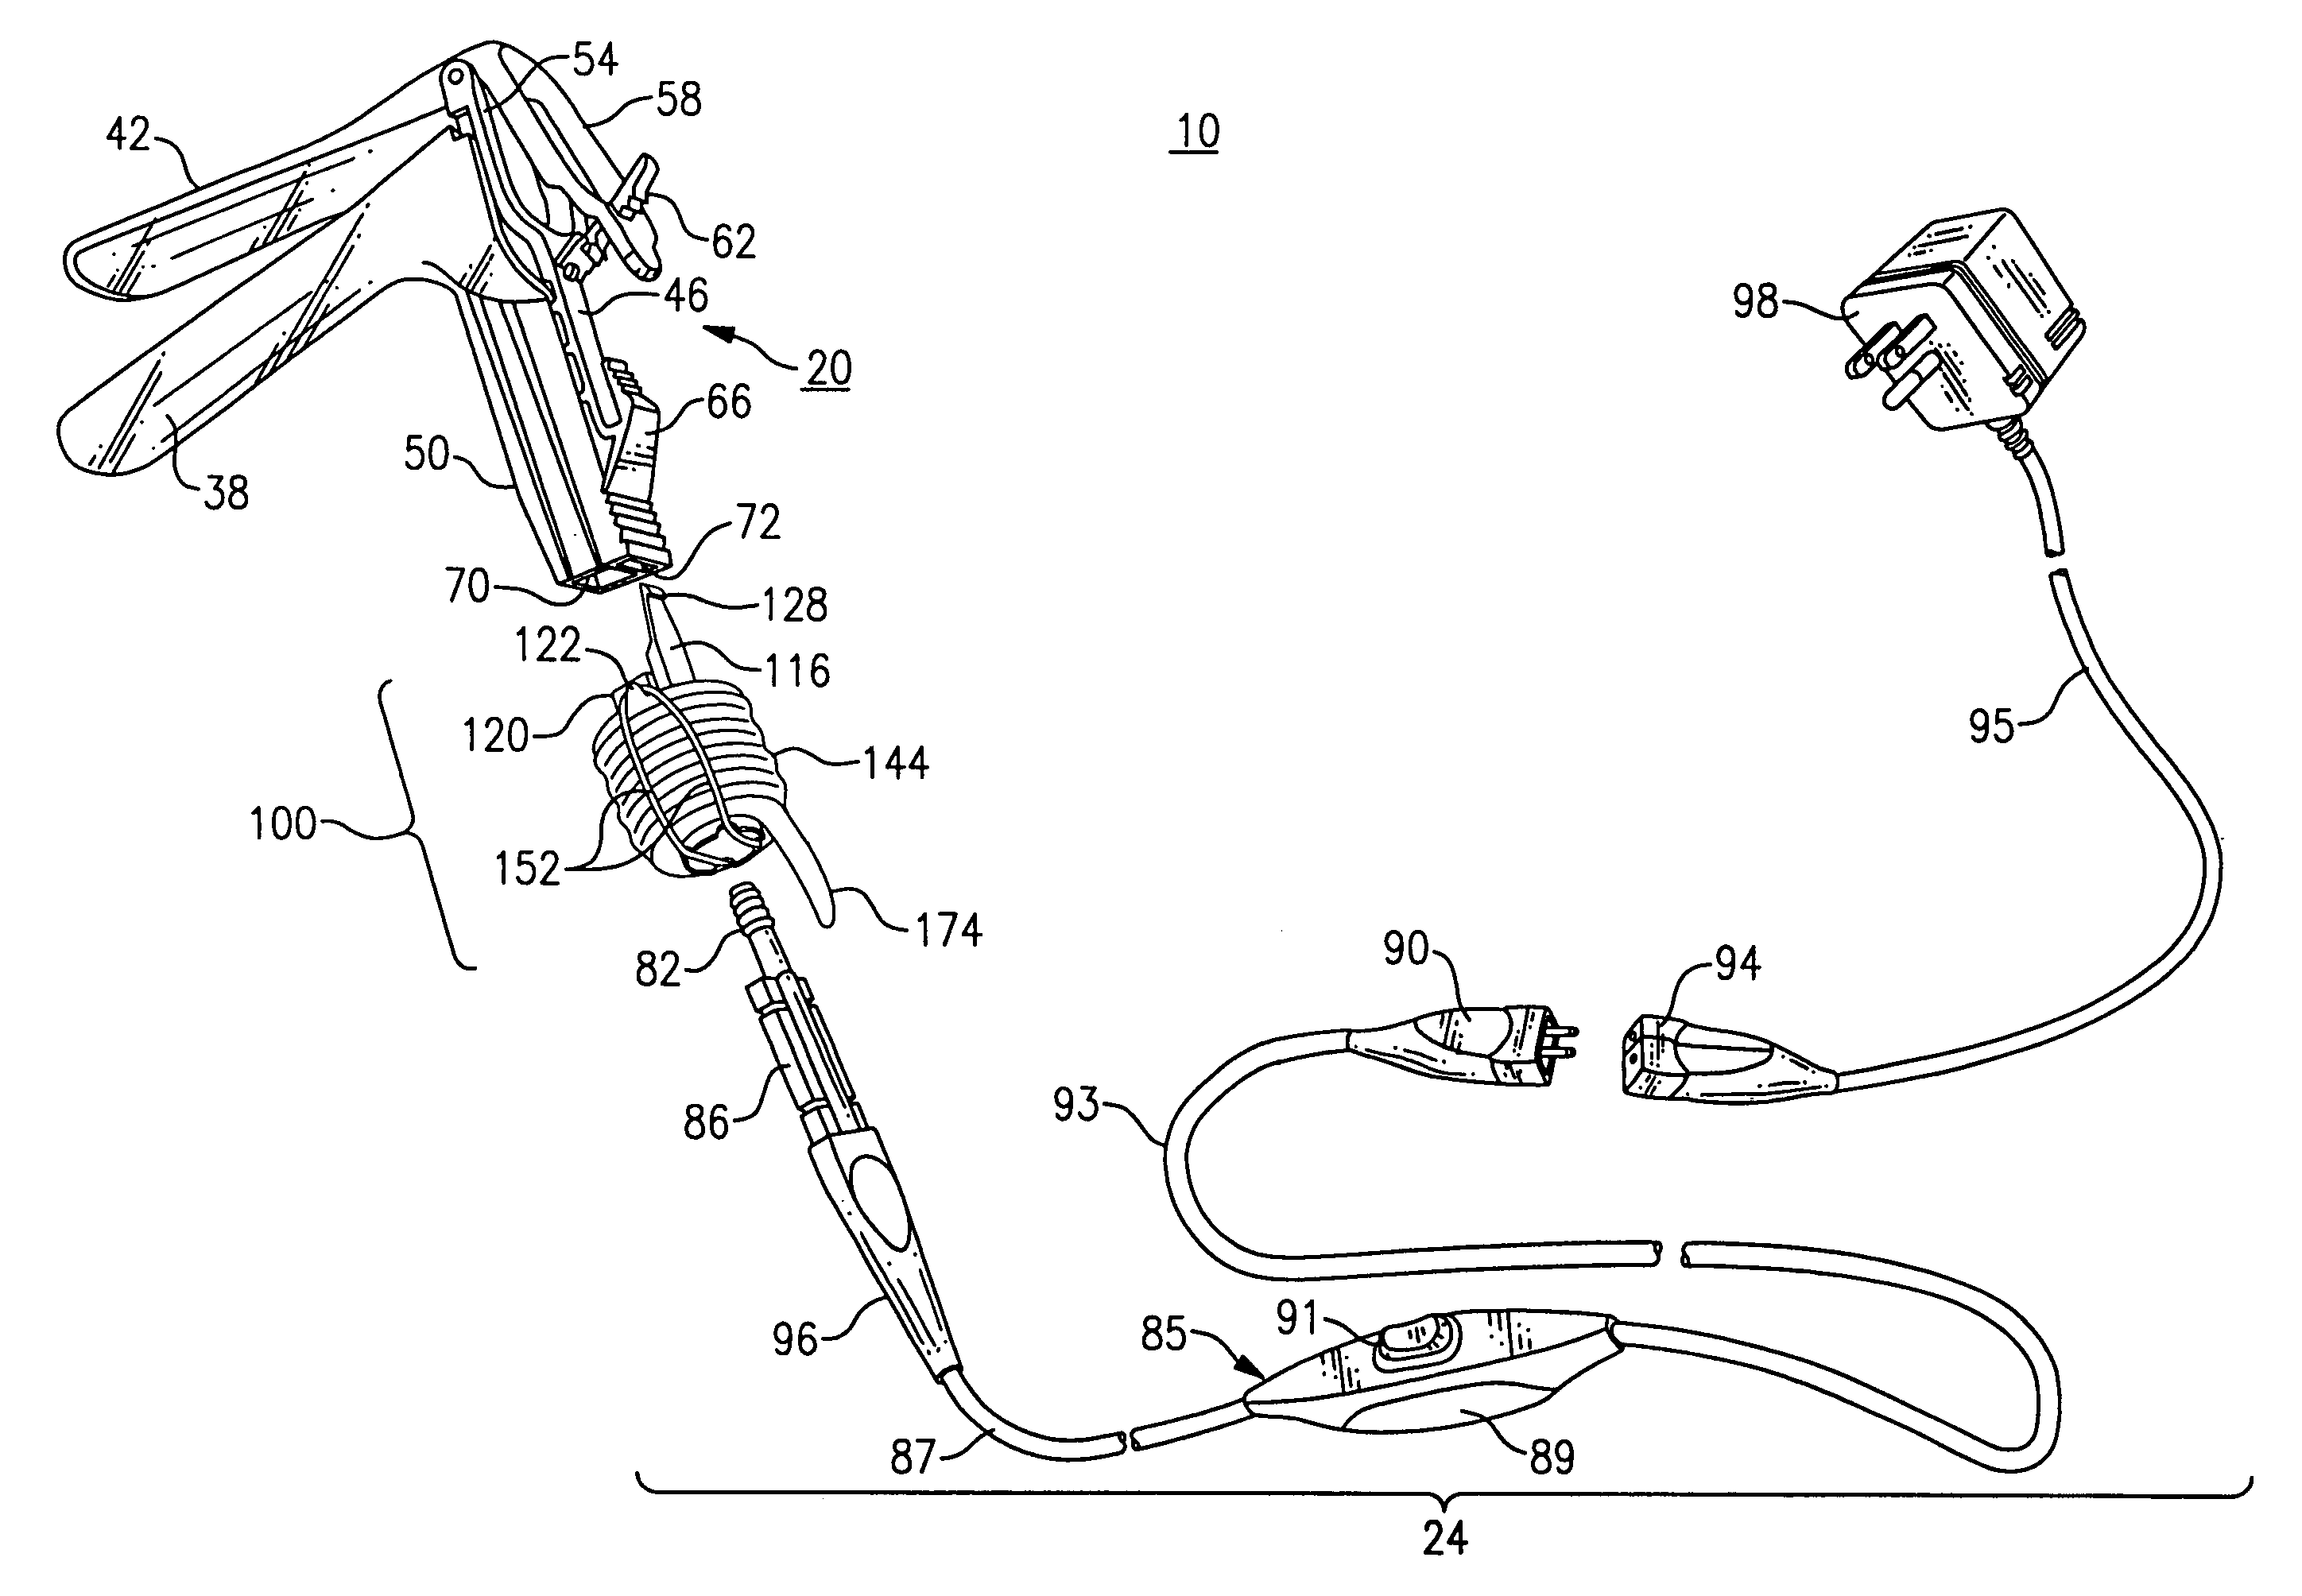 Protective sheath for illumination assembly of a disposable vaginal speculum